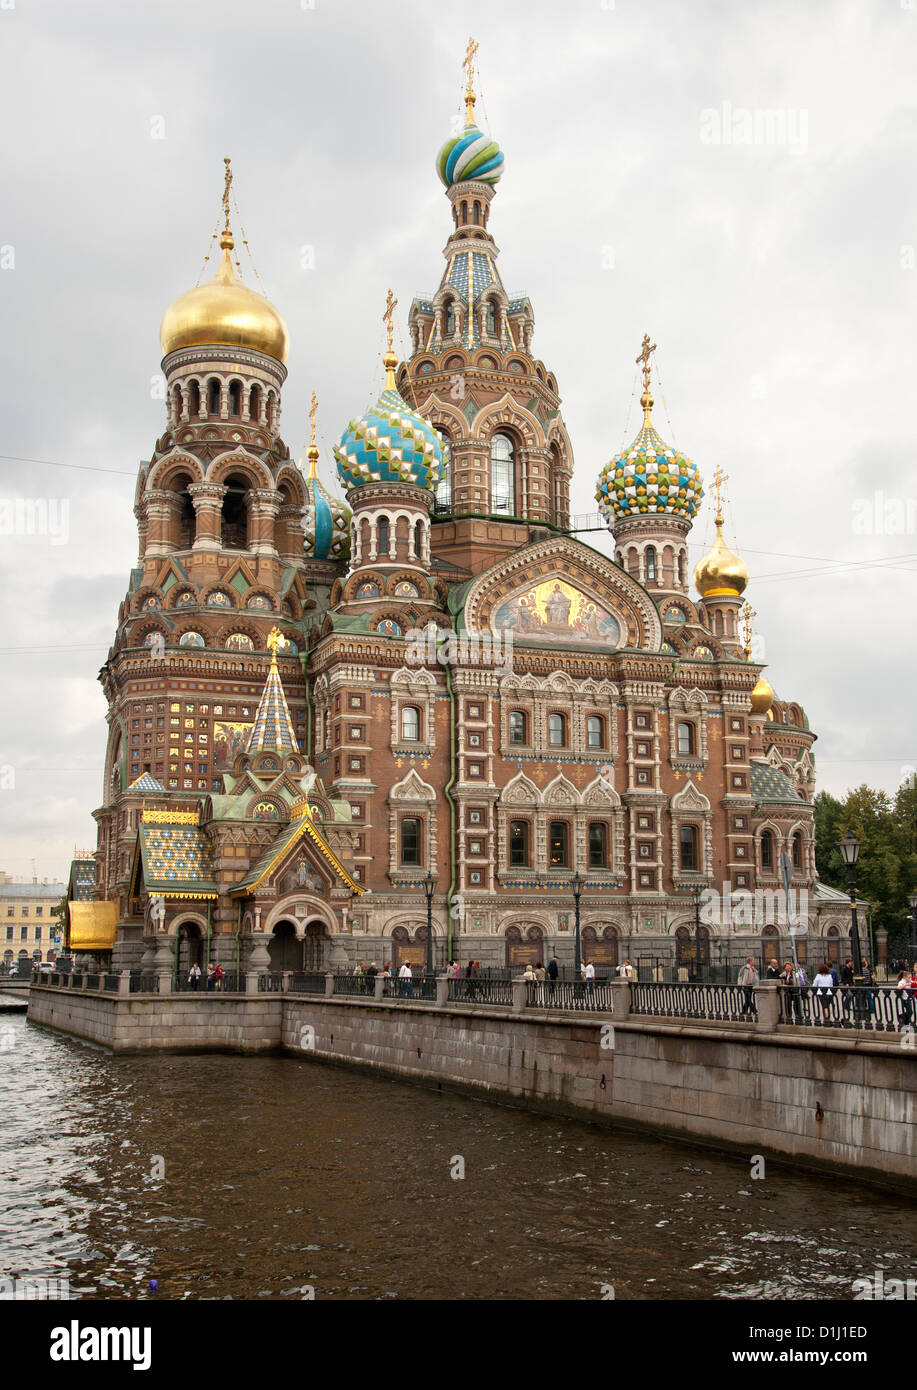 The Church of the Savior on Spilled Blood and the Griboyedov Canal in Saint Petersburg, Russia. Stock Photo